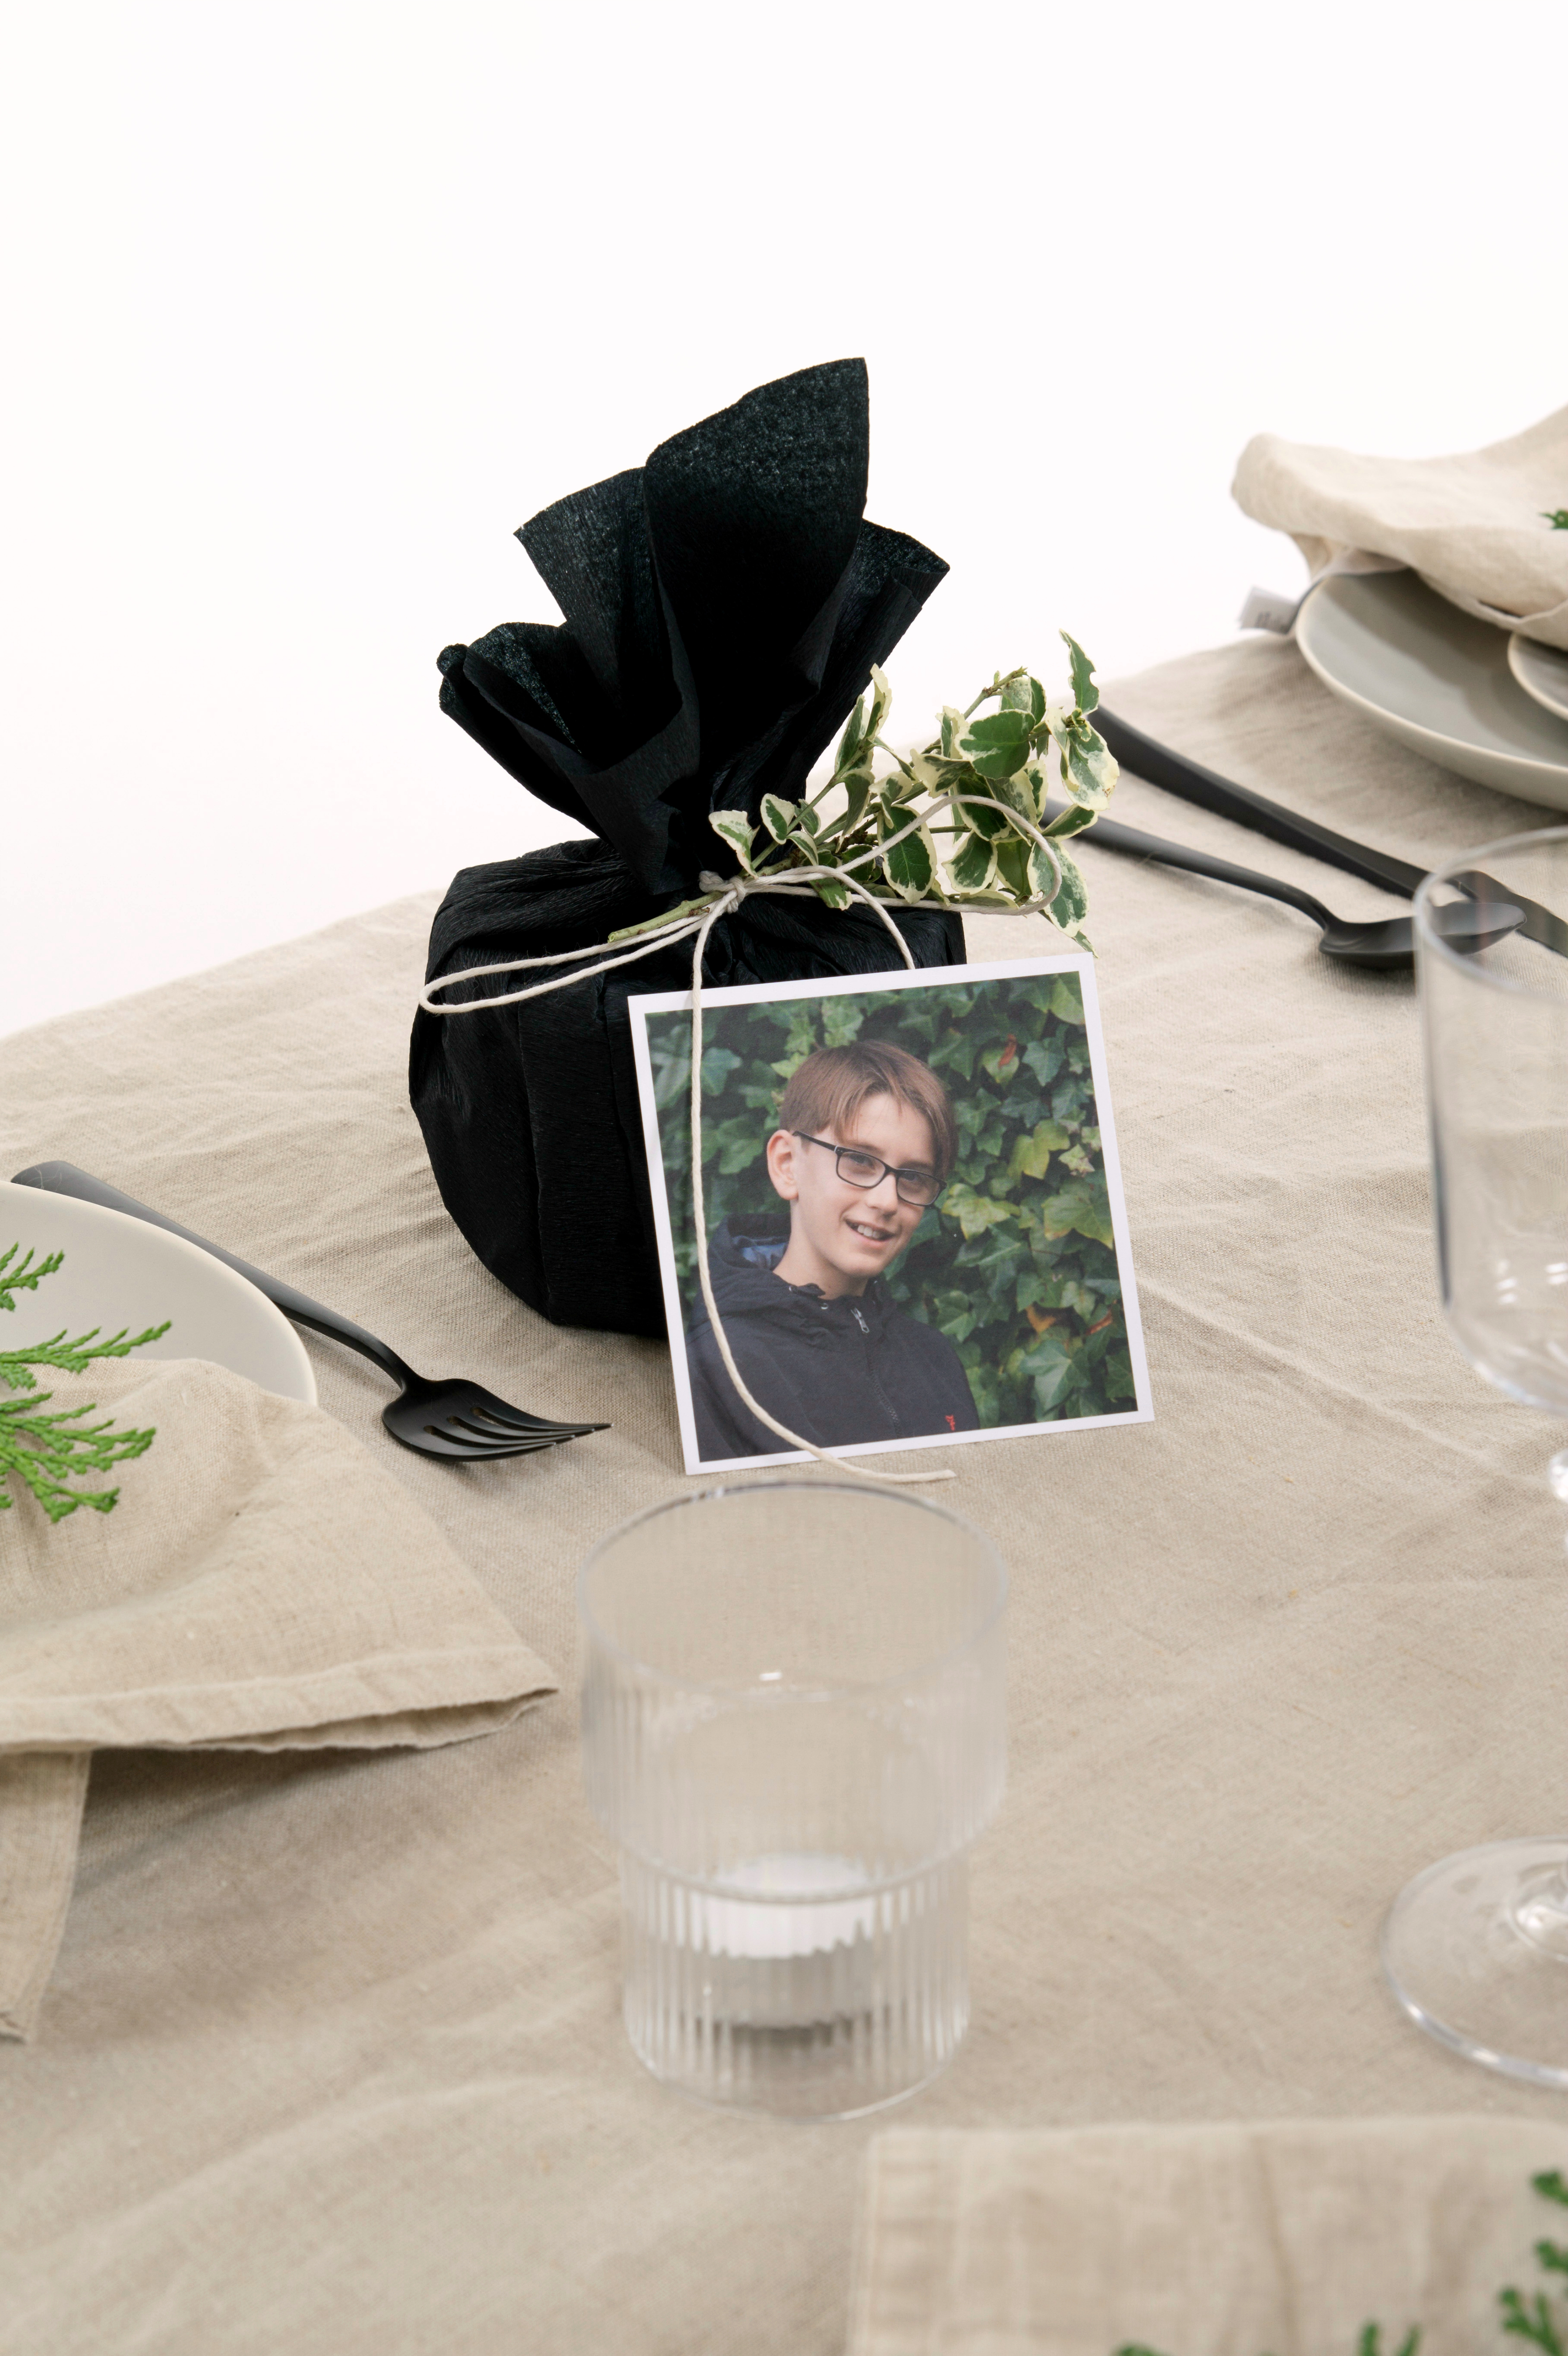 Christmas table with personalised prints from Inkifi